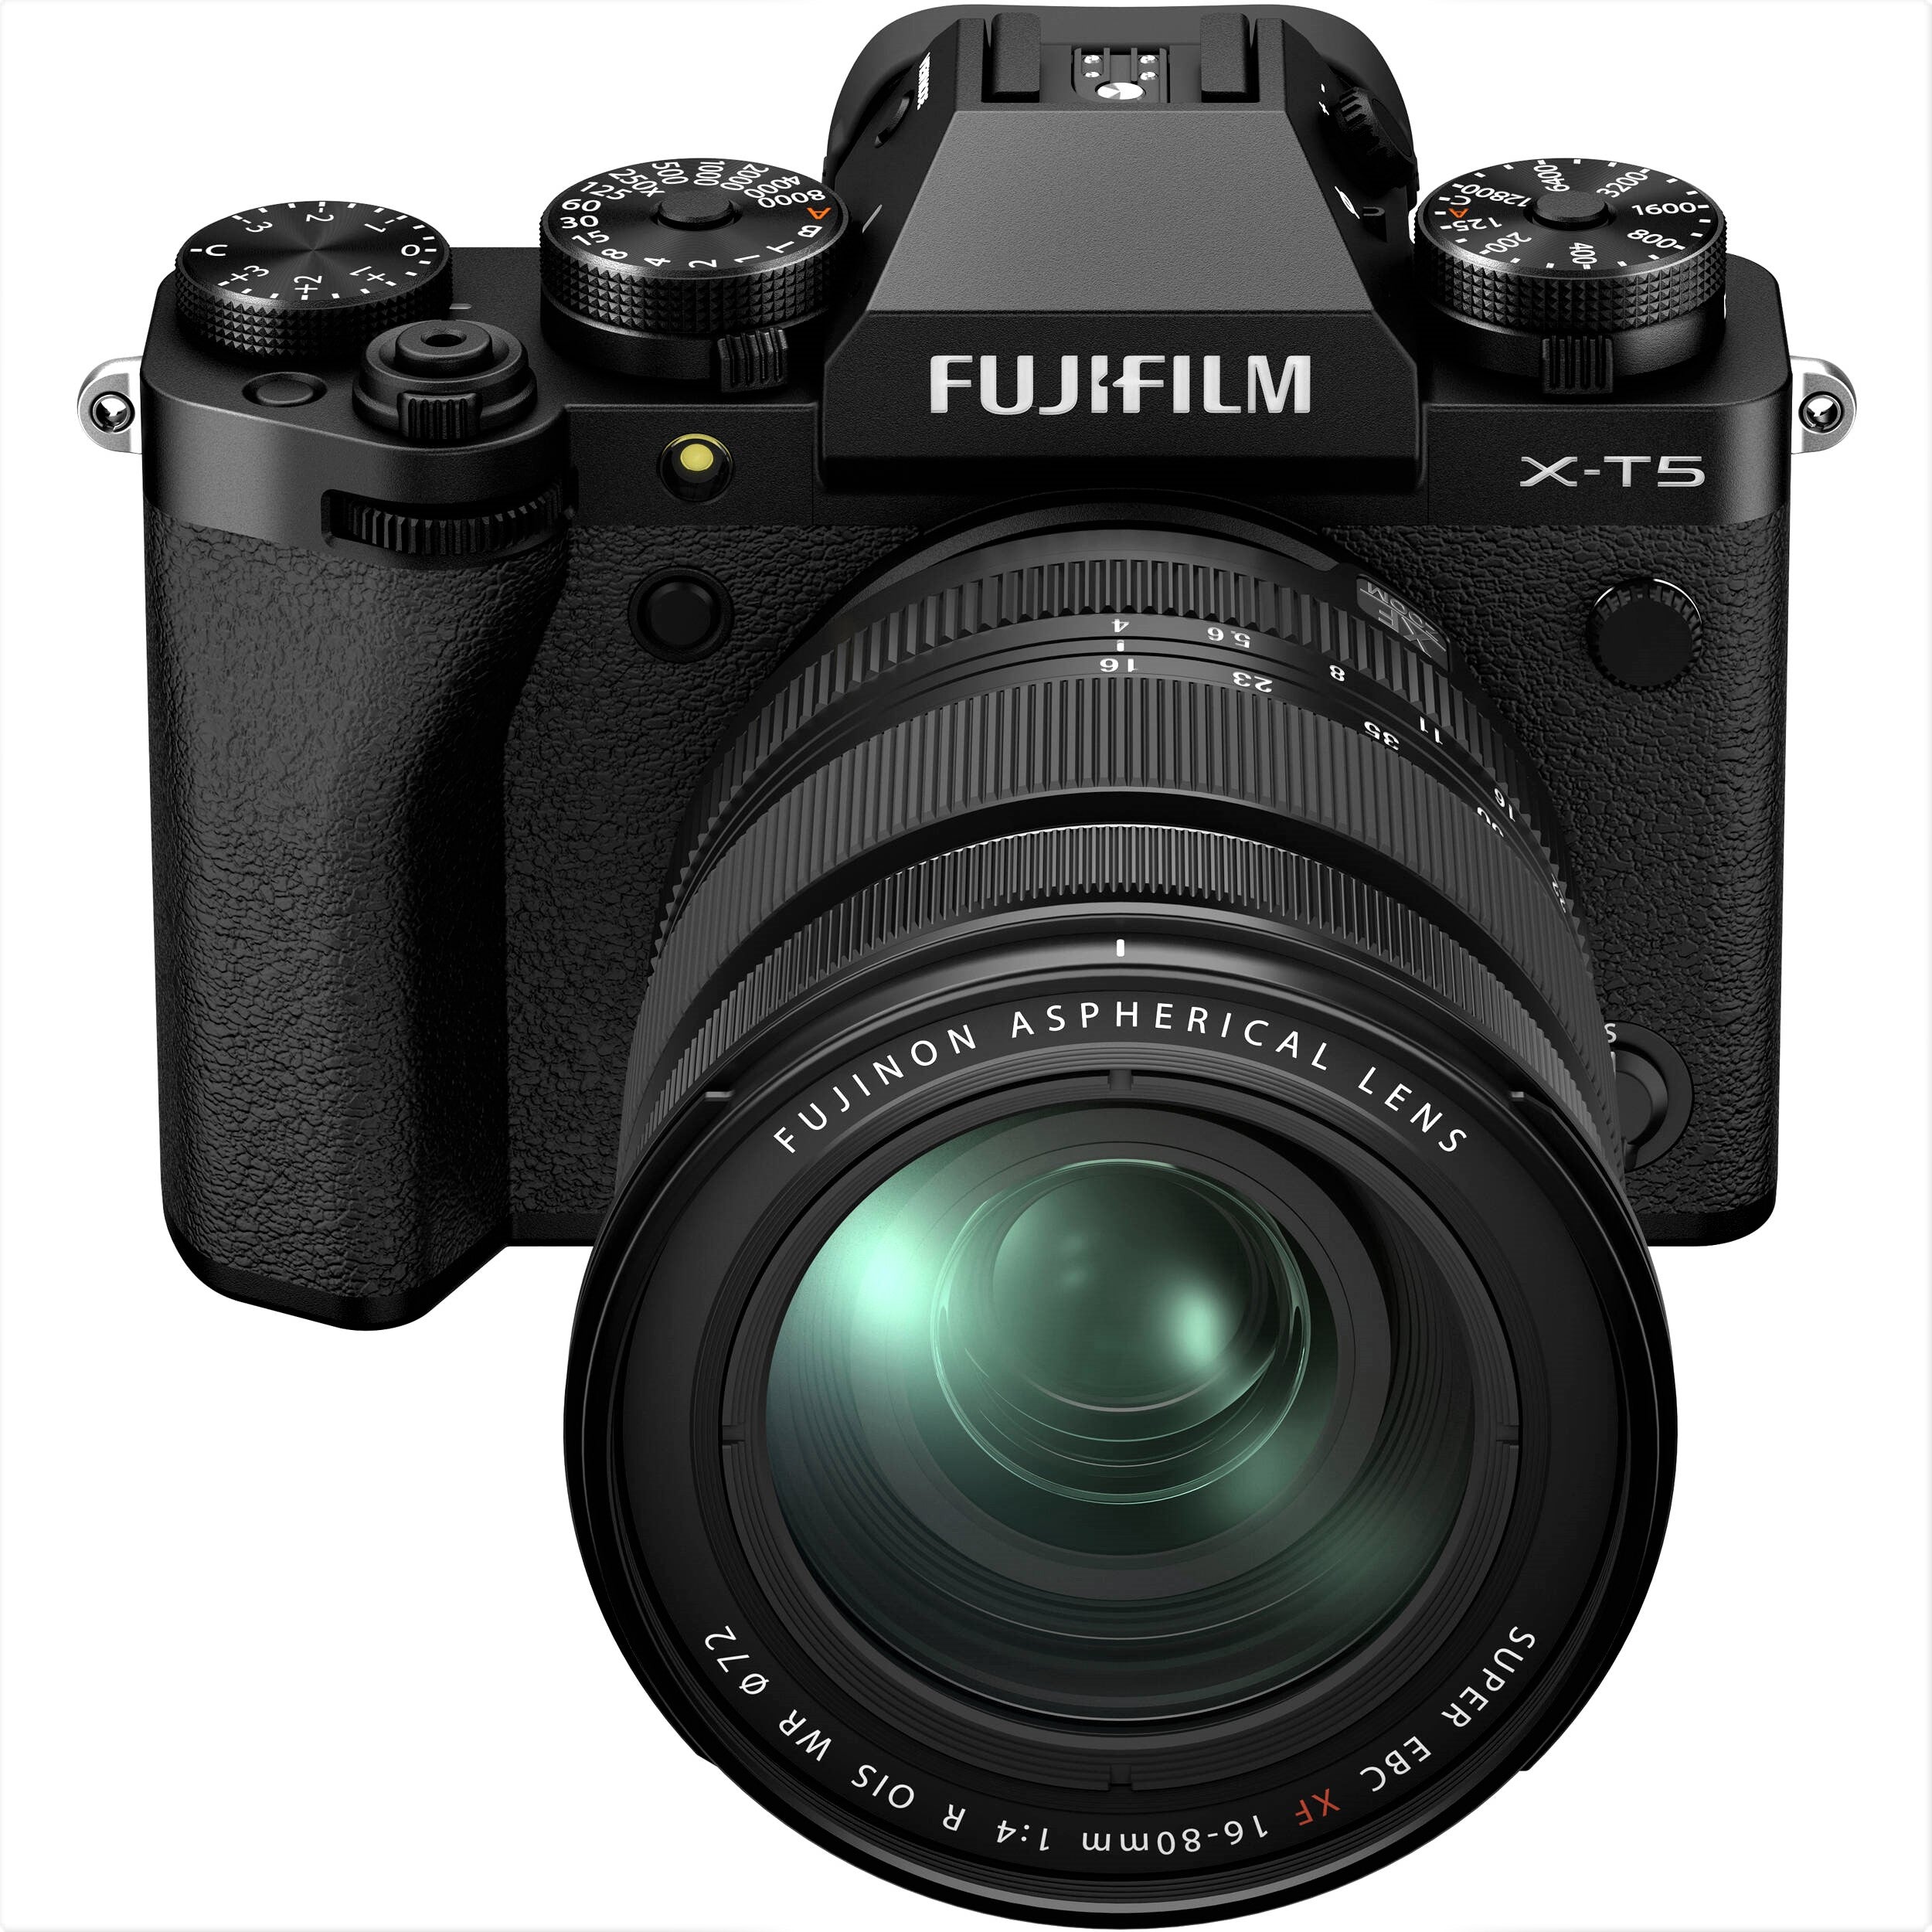 Fujifilm X-T5 Mirrorless Camera with 16-80mm Lens (Black) - Front view